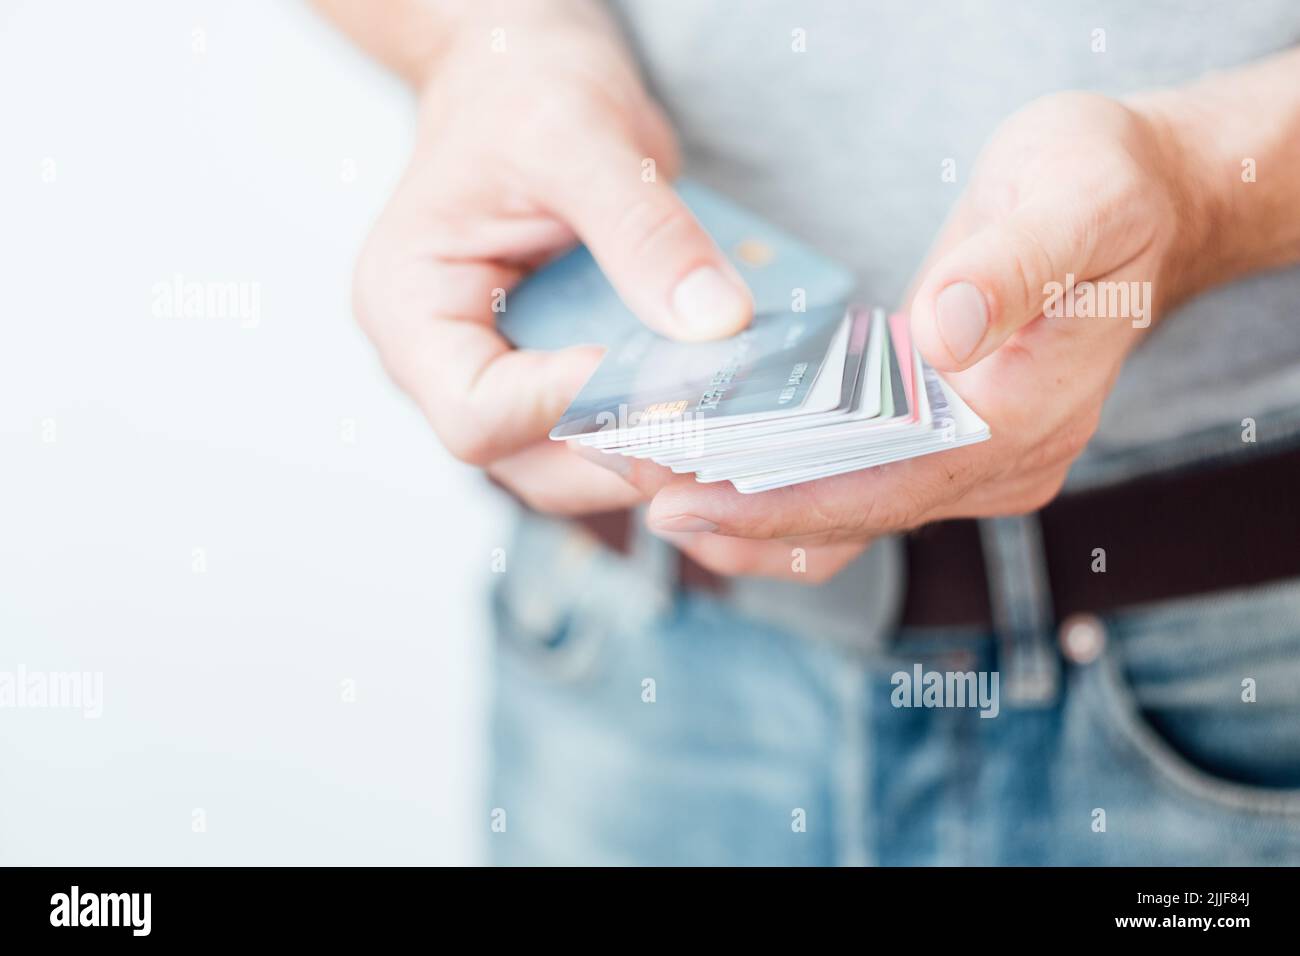 electronic money transactions man hold credit card Stock Photo